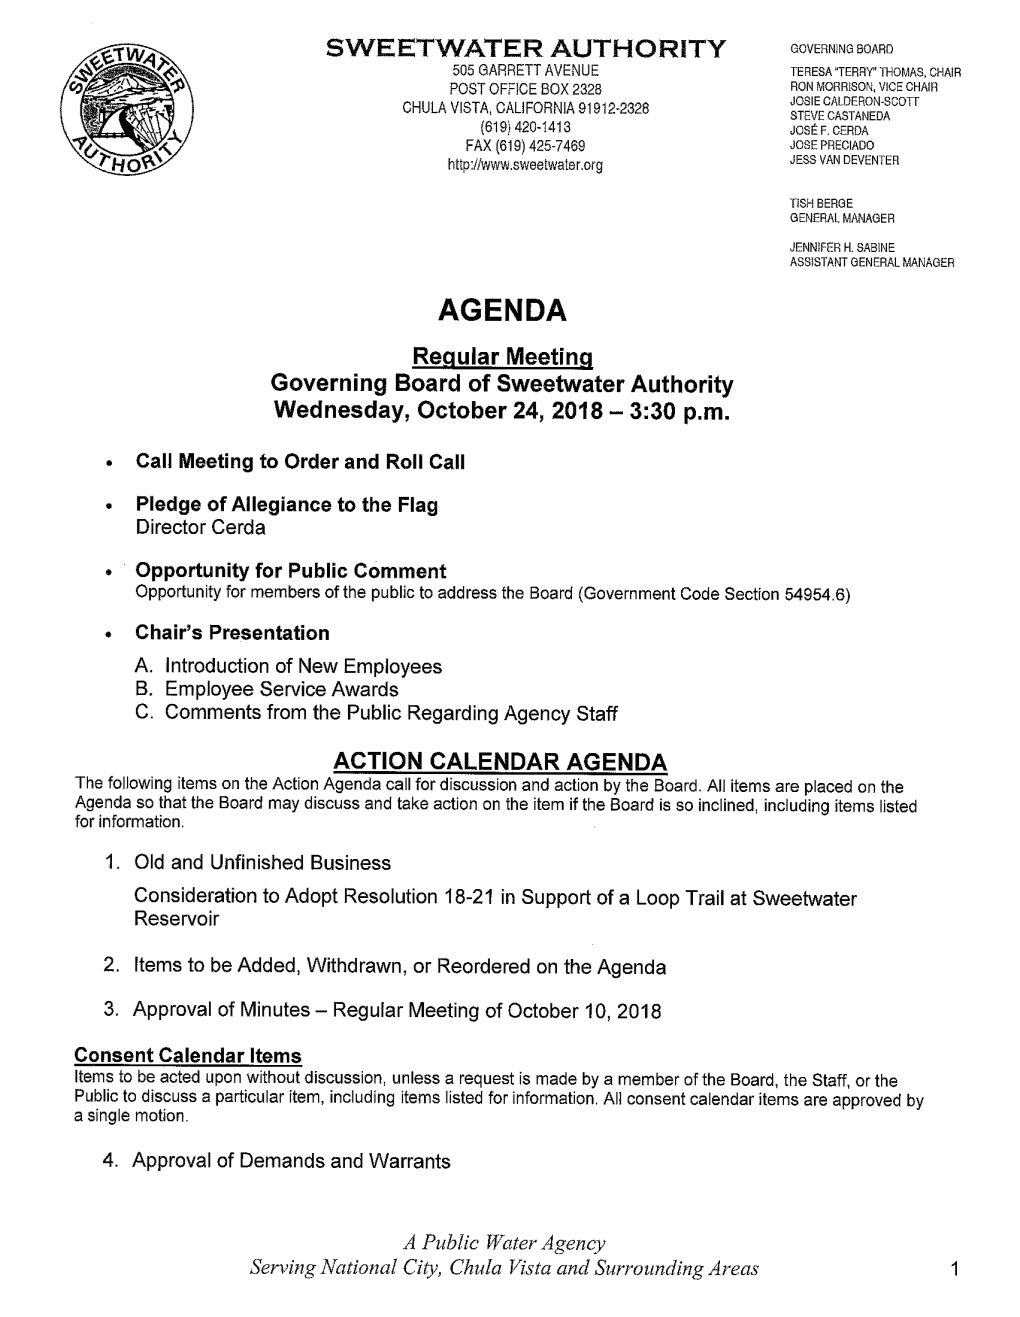 AGENDA Regular Meeting Governing Board of Sweetwater Authority Wednesday, October 24, 2018 - 3:30 P.M